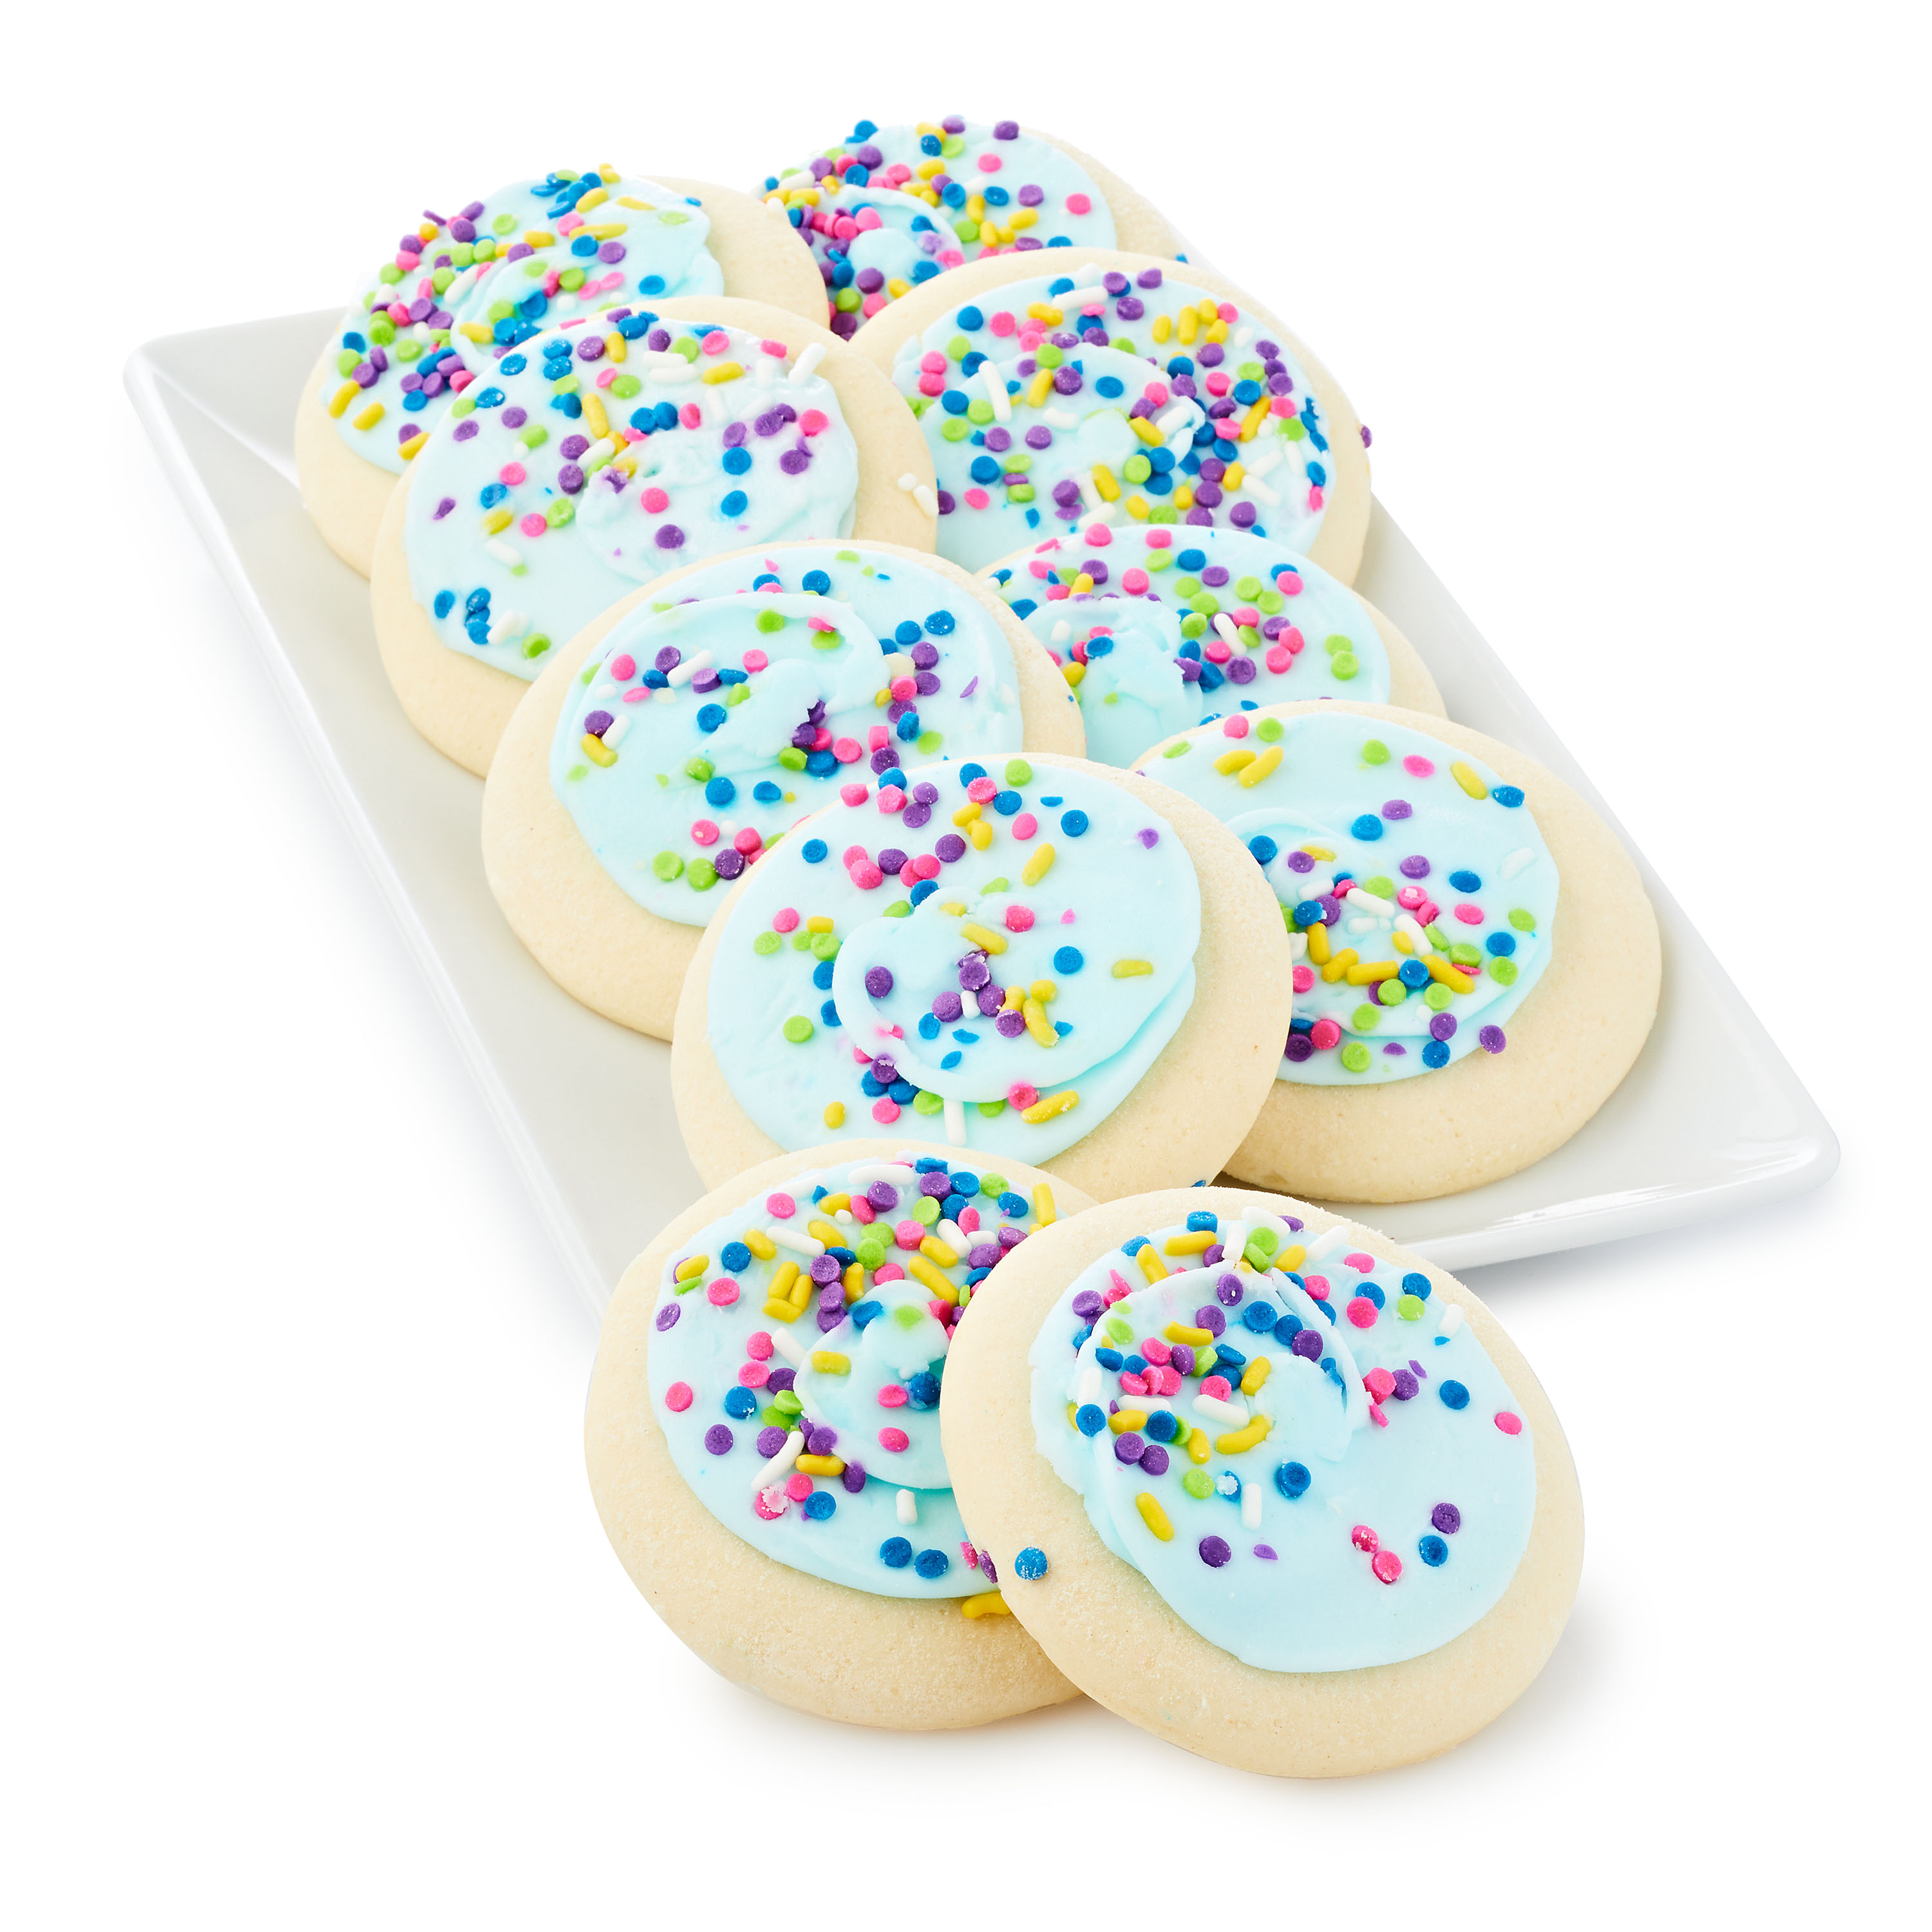 Freshness Guaranteed Frosted Sugar Cookies, Blue, 13.5 oz,10 Count, Shelf-Stable/Ambient, Whole - image 3 of 9